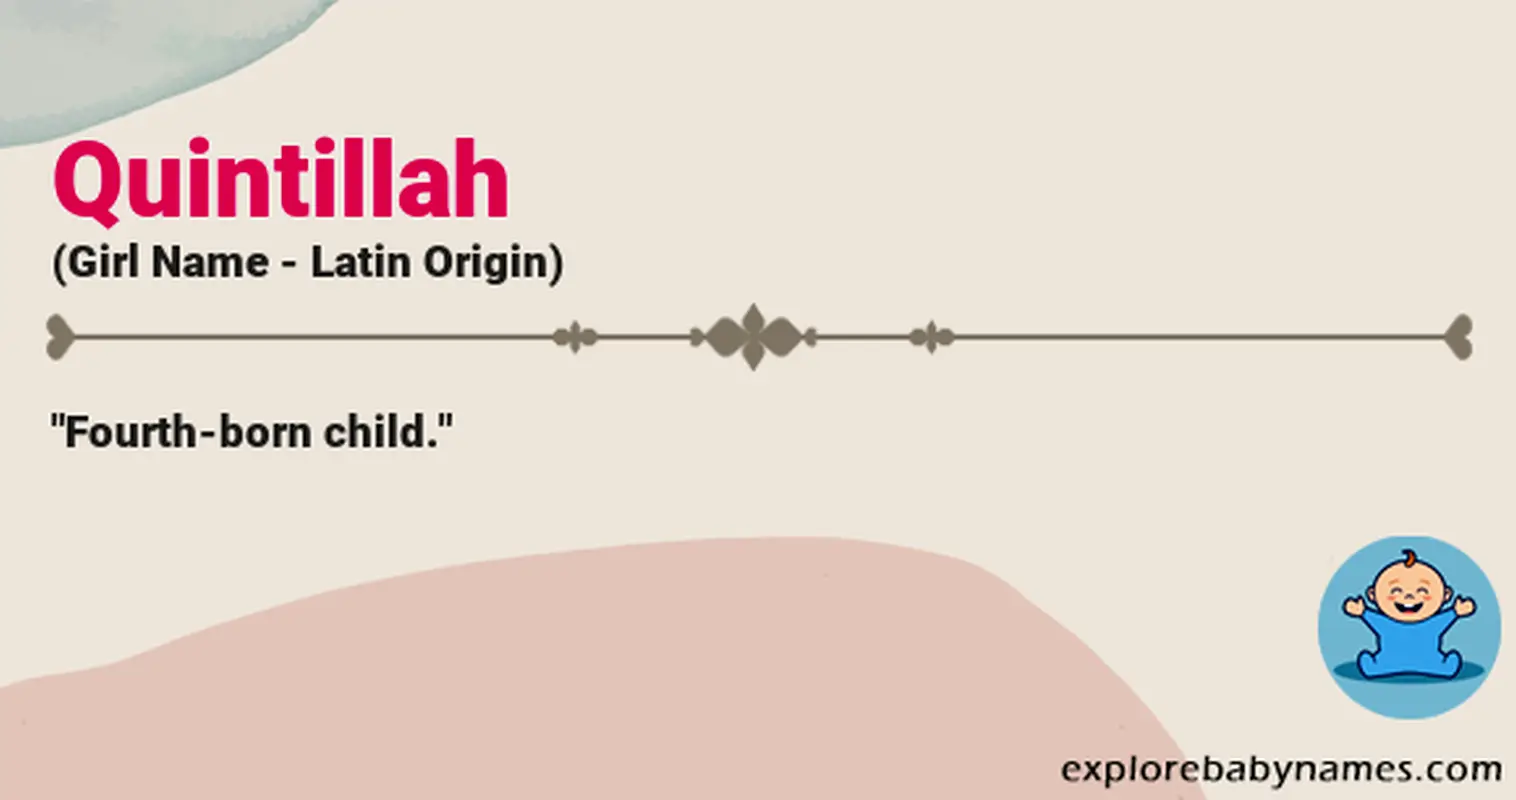 Meaning of Quintillah